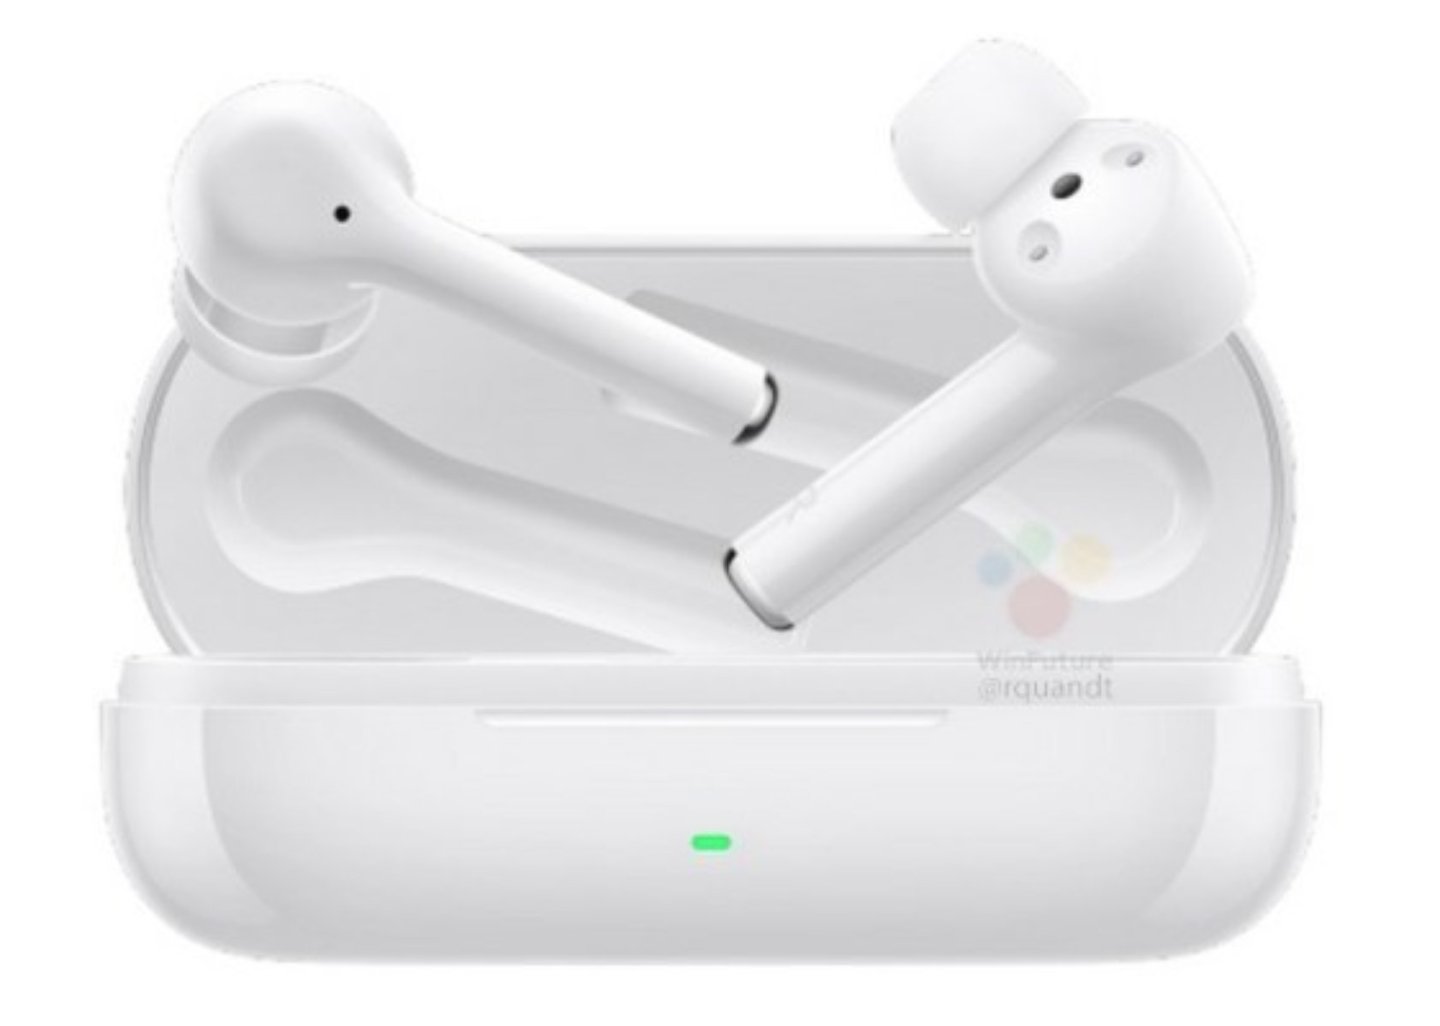 petulance grænse kassette Huawei FreeBuds 3i: Apple AirPods Pro clones that come with 24 dB(A) ANC  and Quick Pairing - NotebookCheck.net News